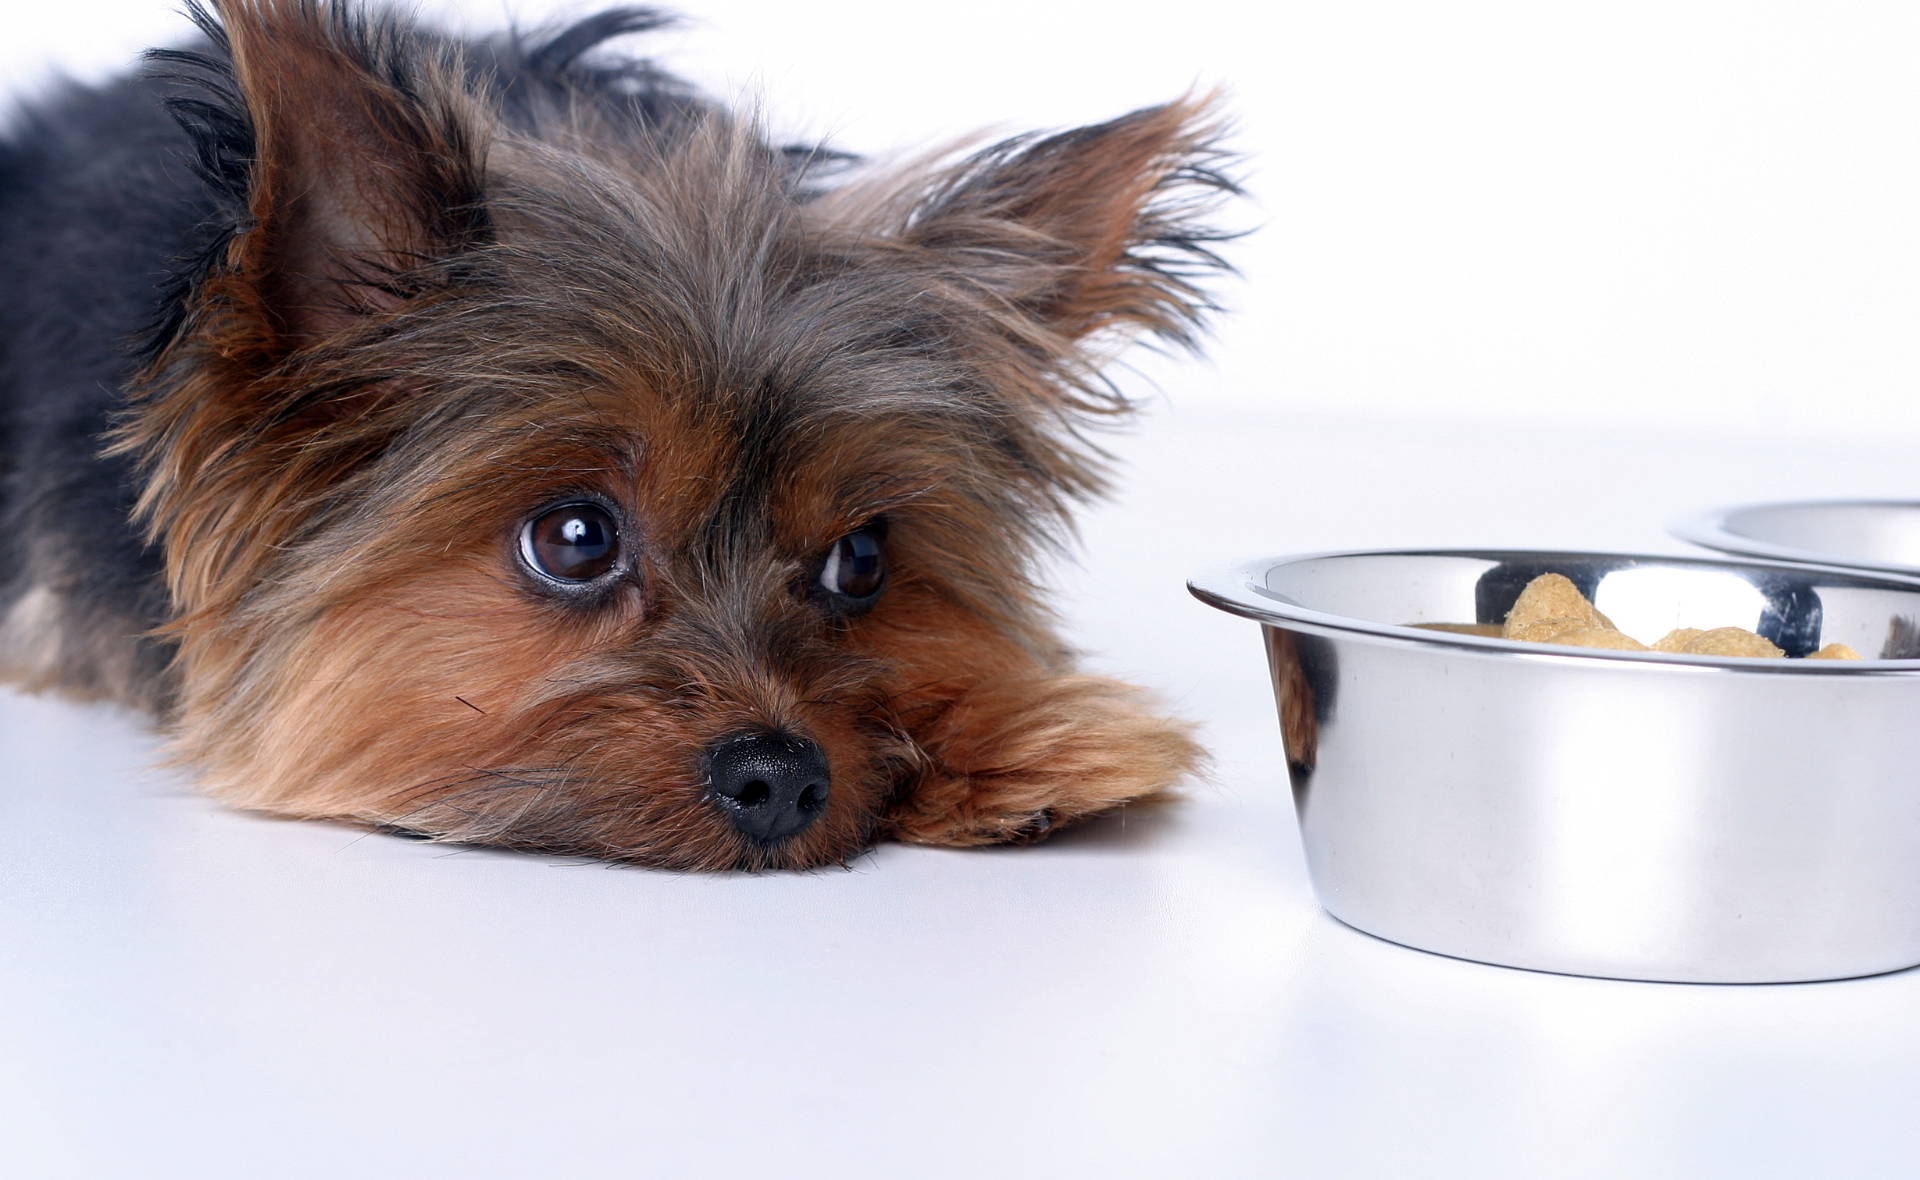 Tiny dog besides food tray. How to treat dog Constipation